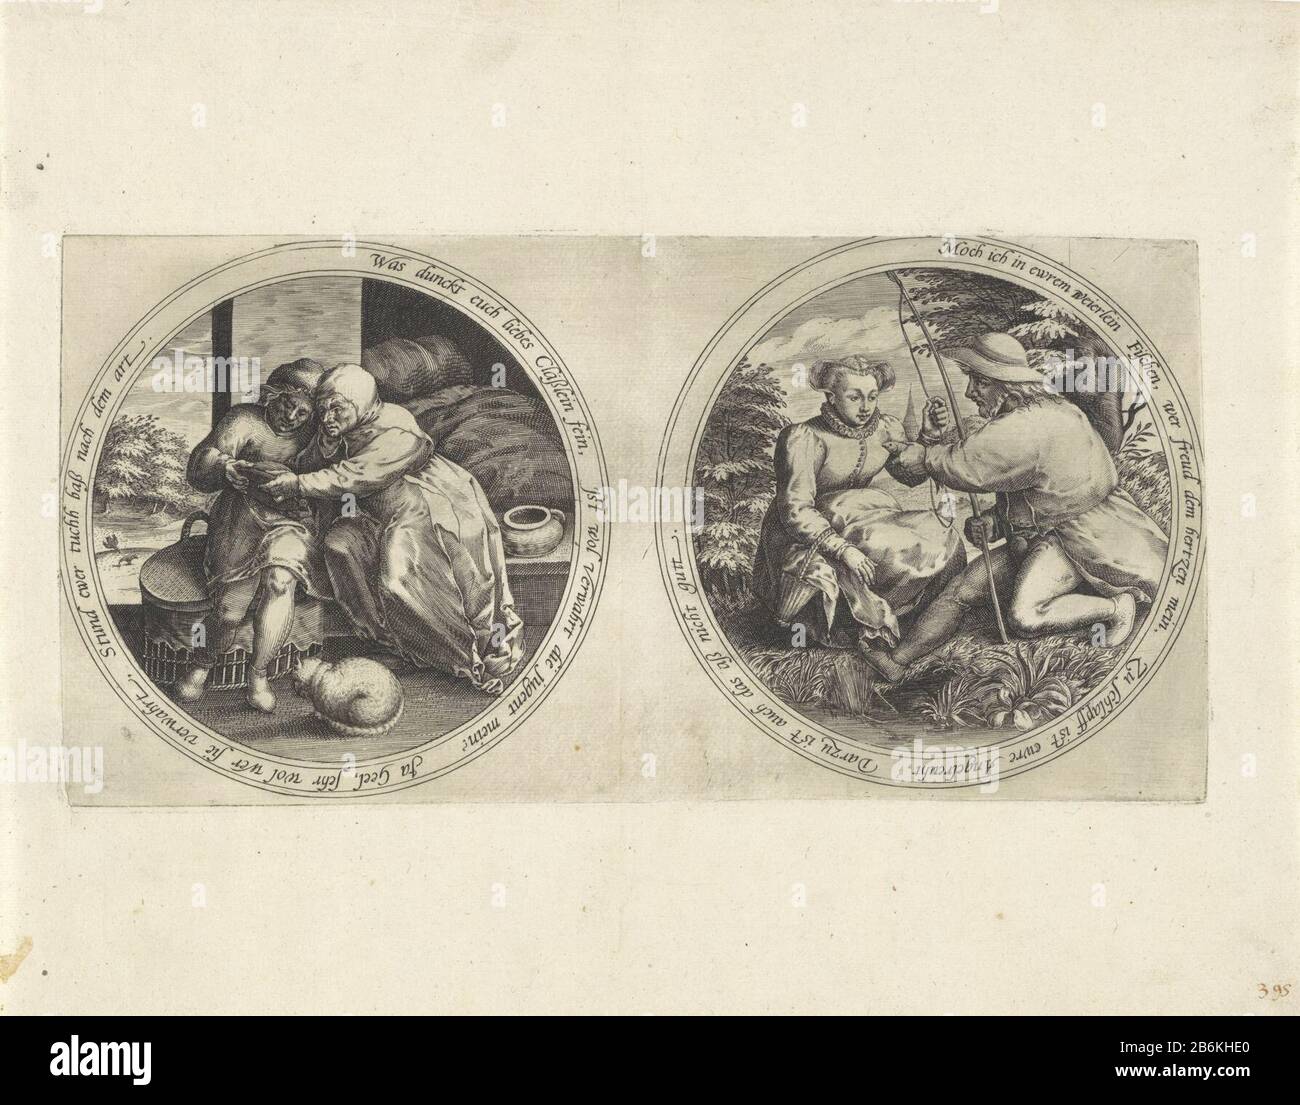 Couple with a mirror and a fisherman handing a woman a fish medallions with ambiguous edge notebooks (series title) Two medallions with an ambiguous edge inscription in German